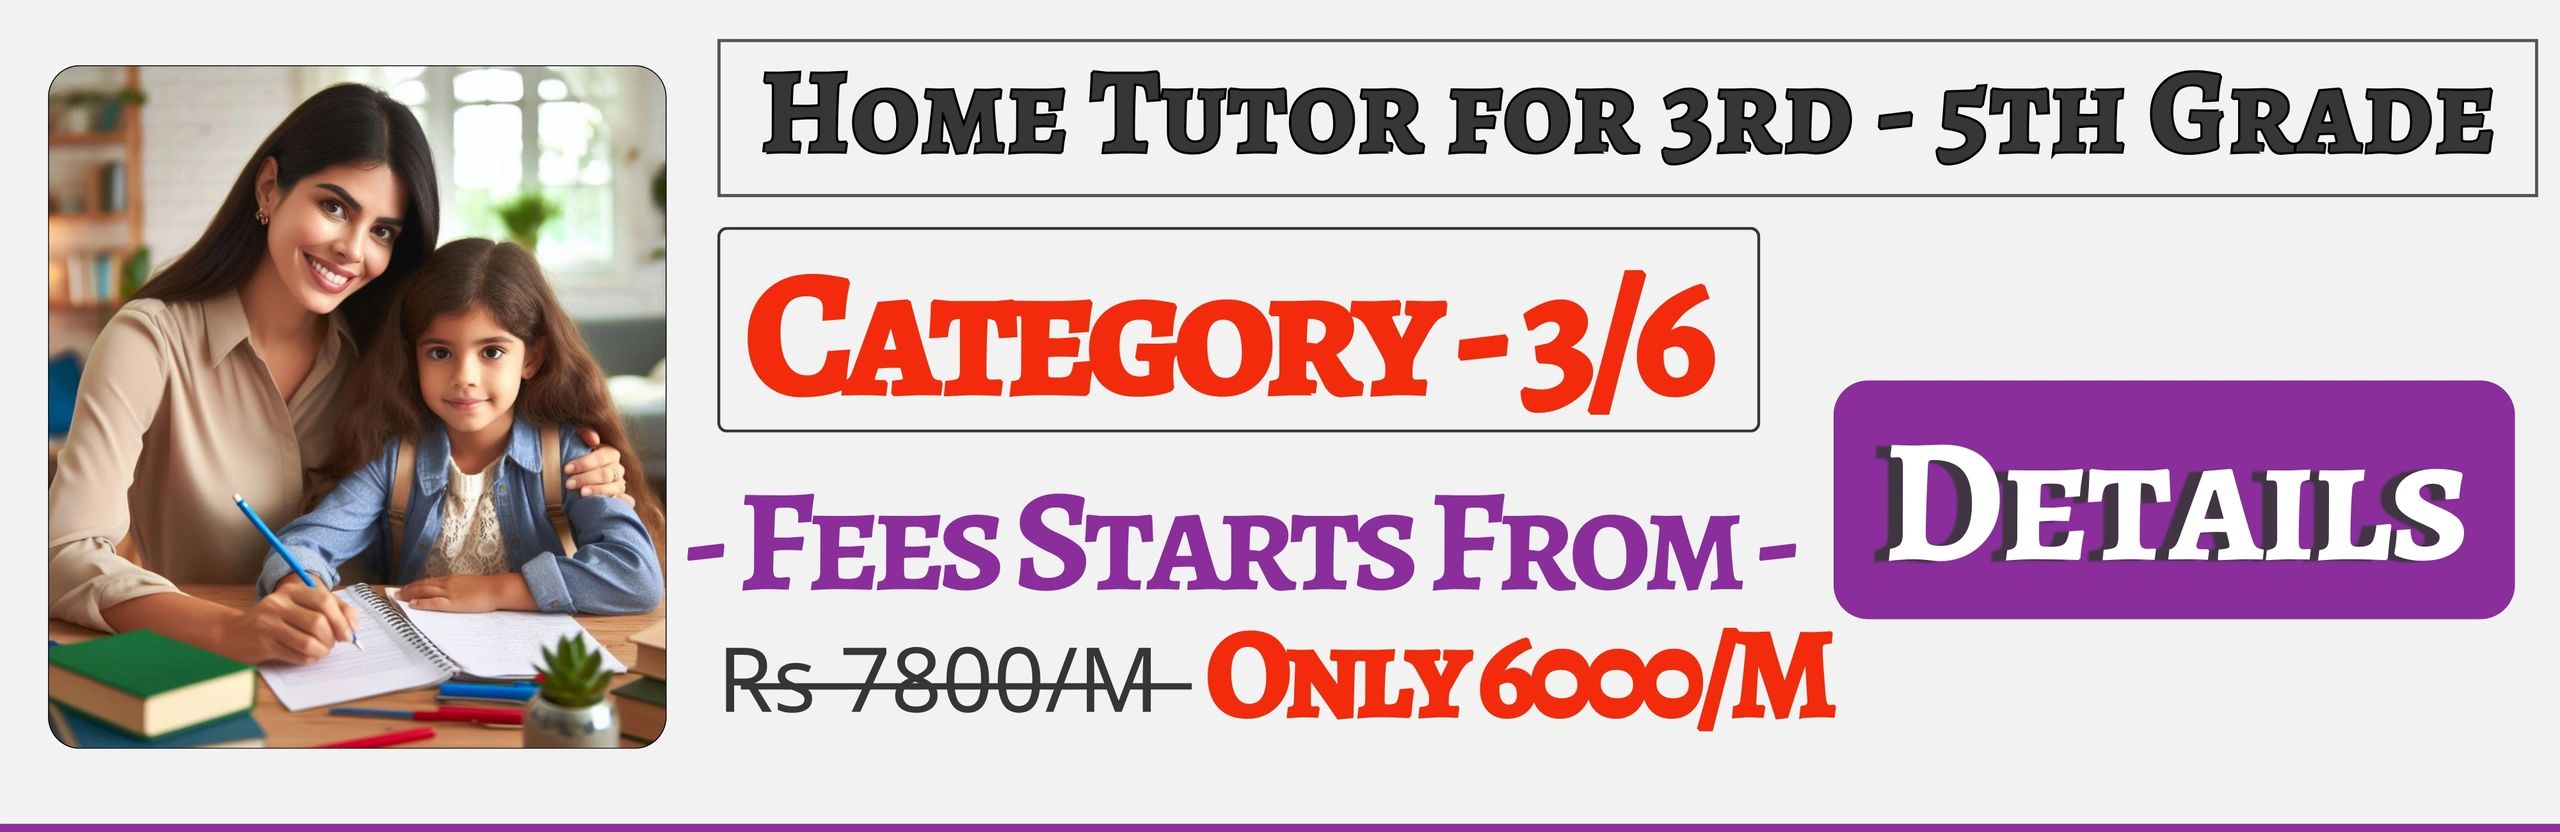 Book Best Home Tuition Tutors For 3rd , 4th & 5th In Jaipur , Fees Only 6000/M